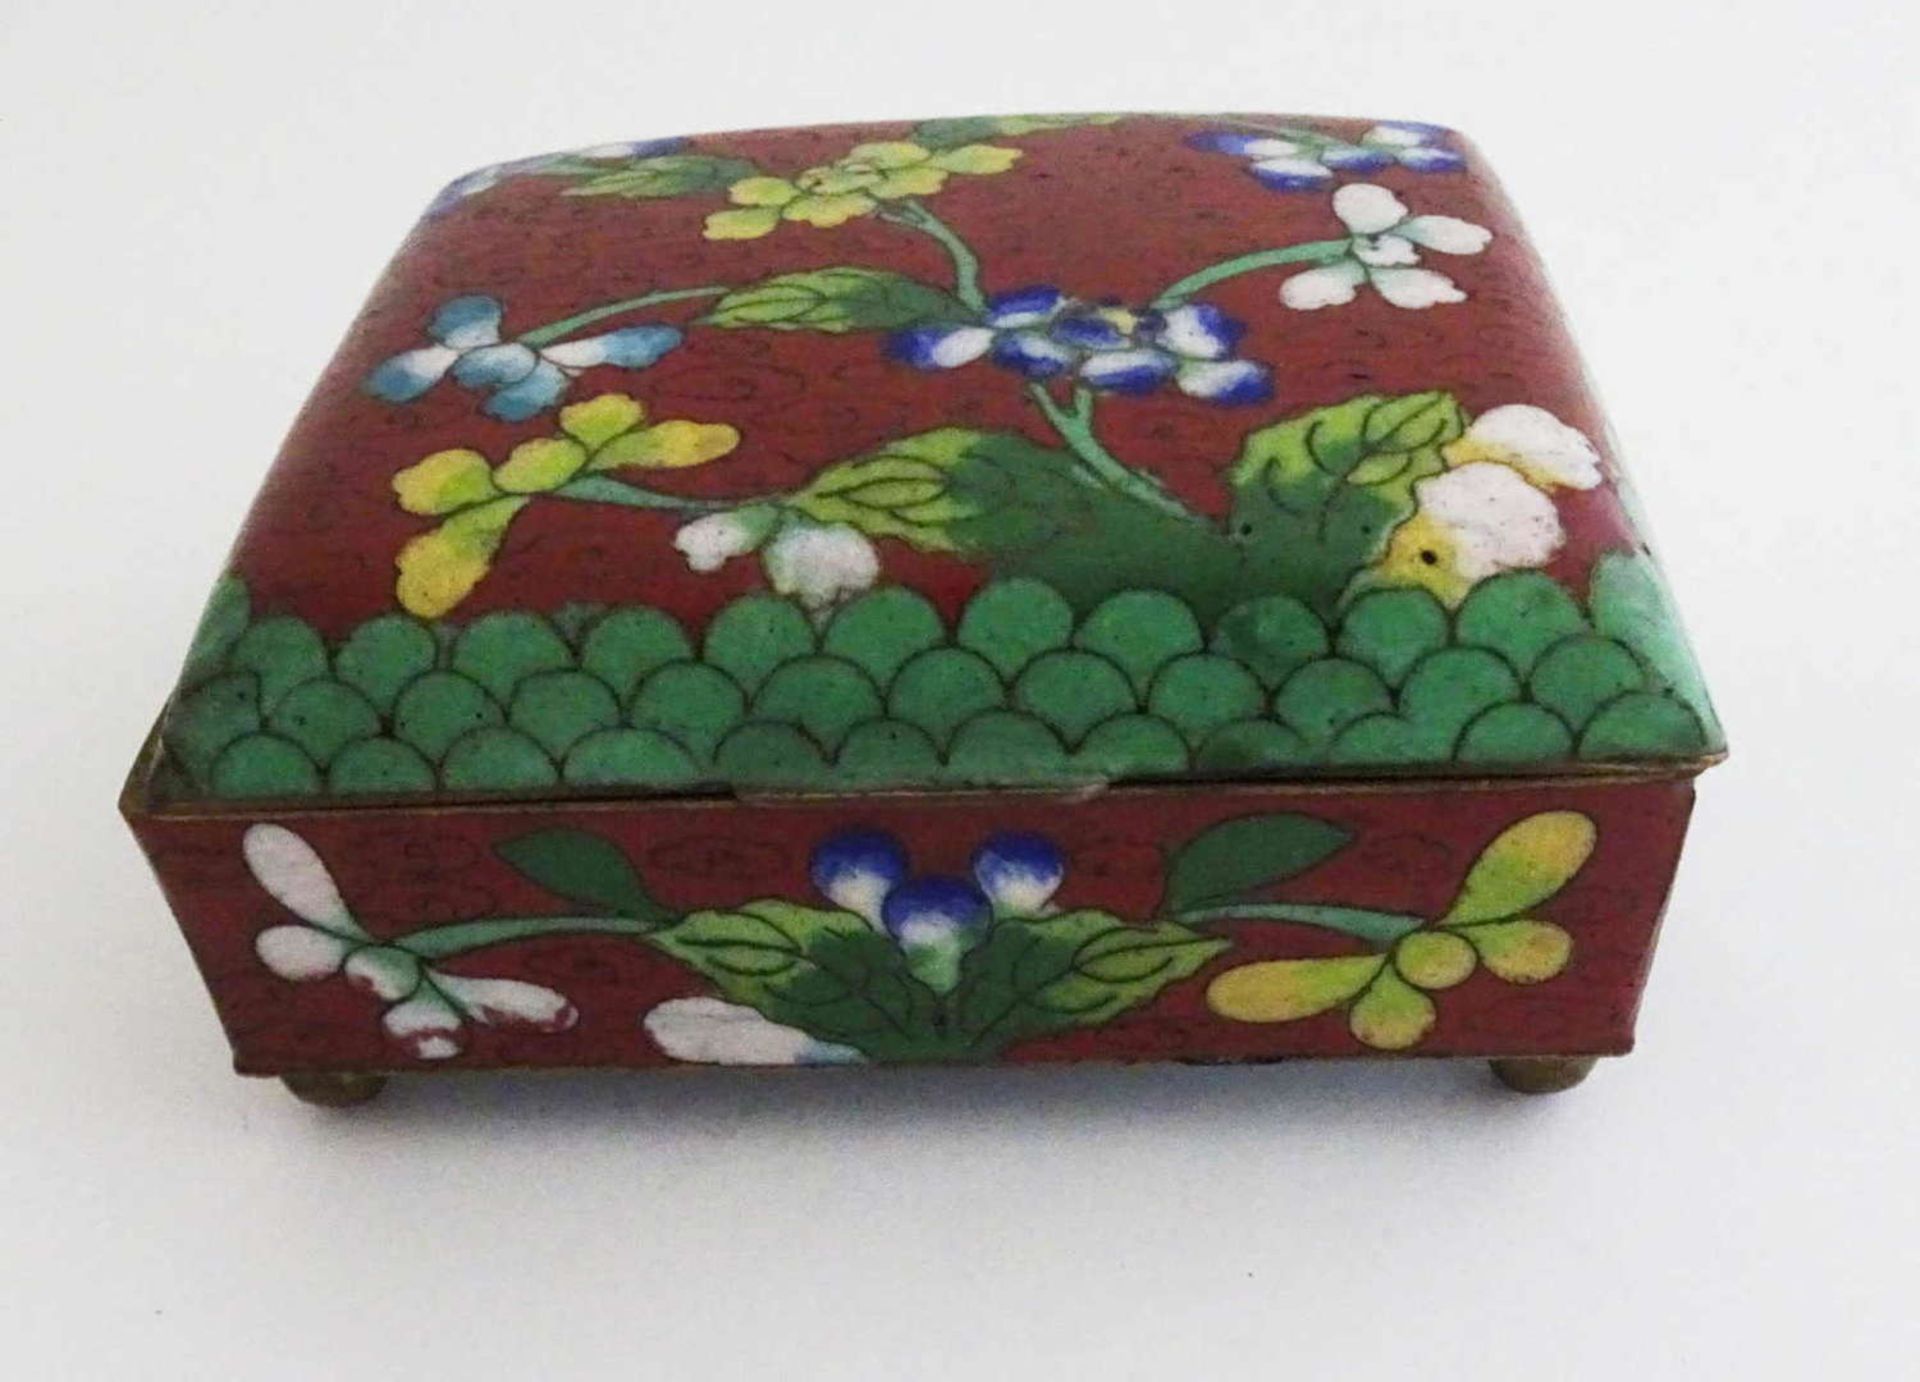 China cloisonné lidded box, mid-20th century Domed lid. All around floral decor. Measurements: